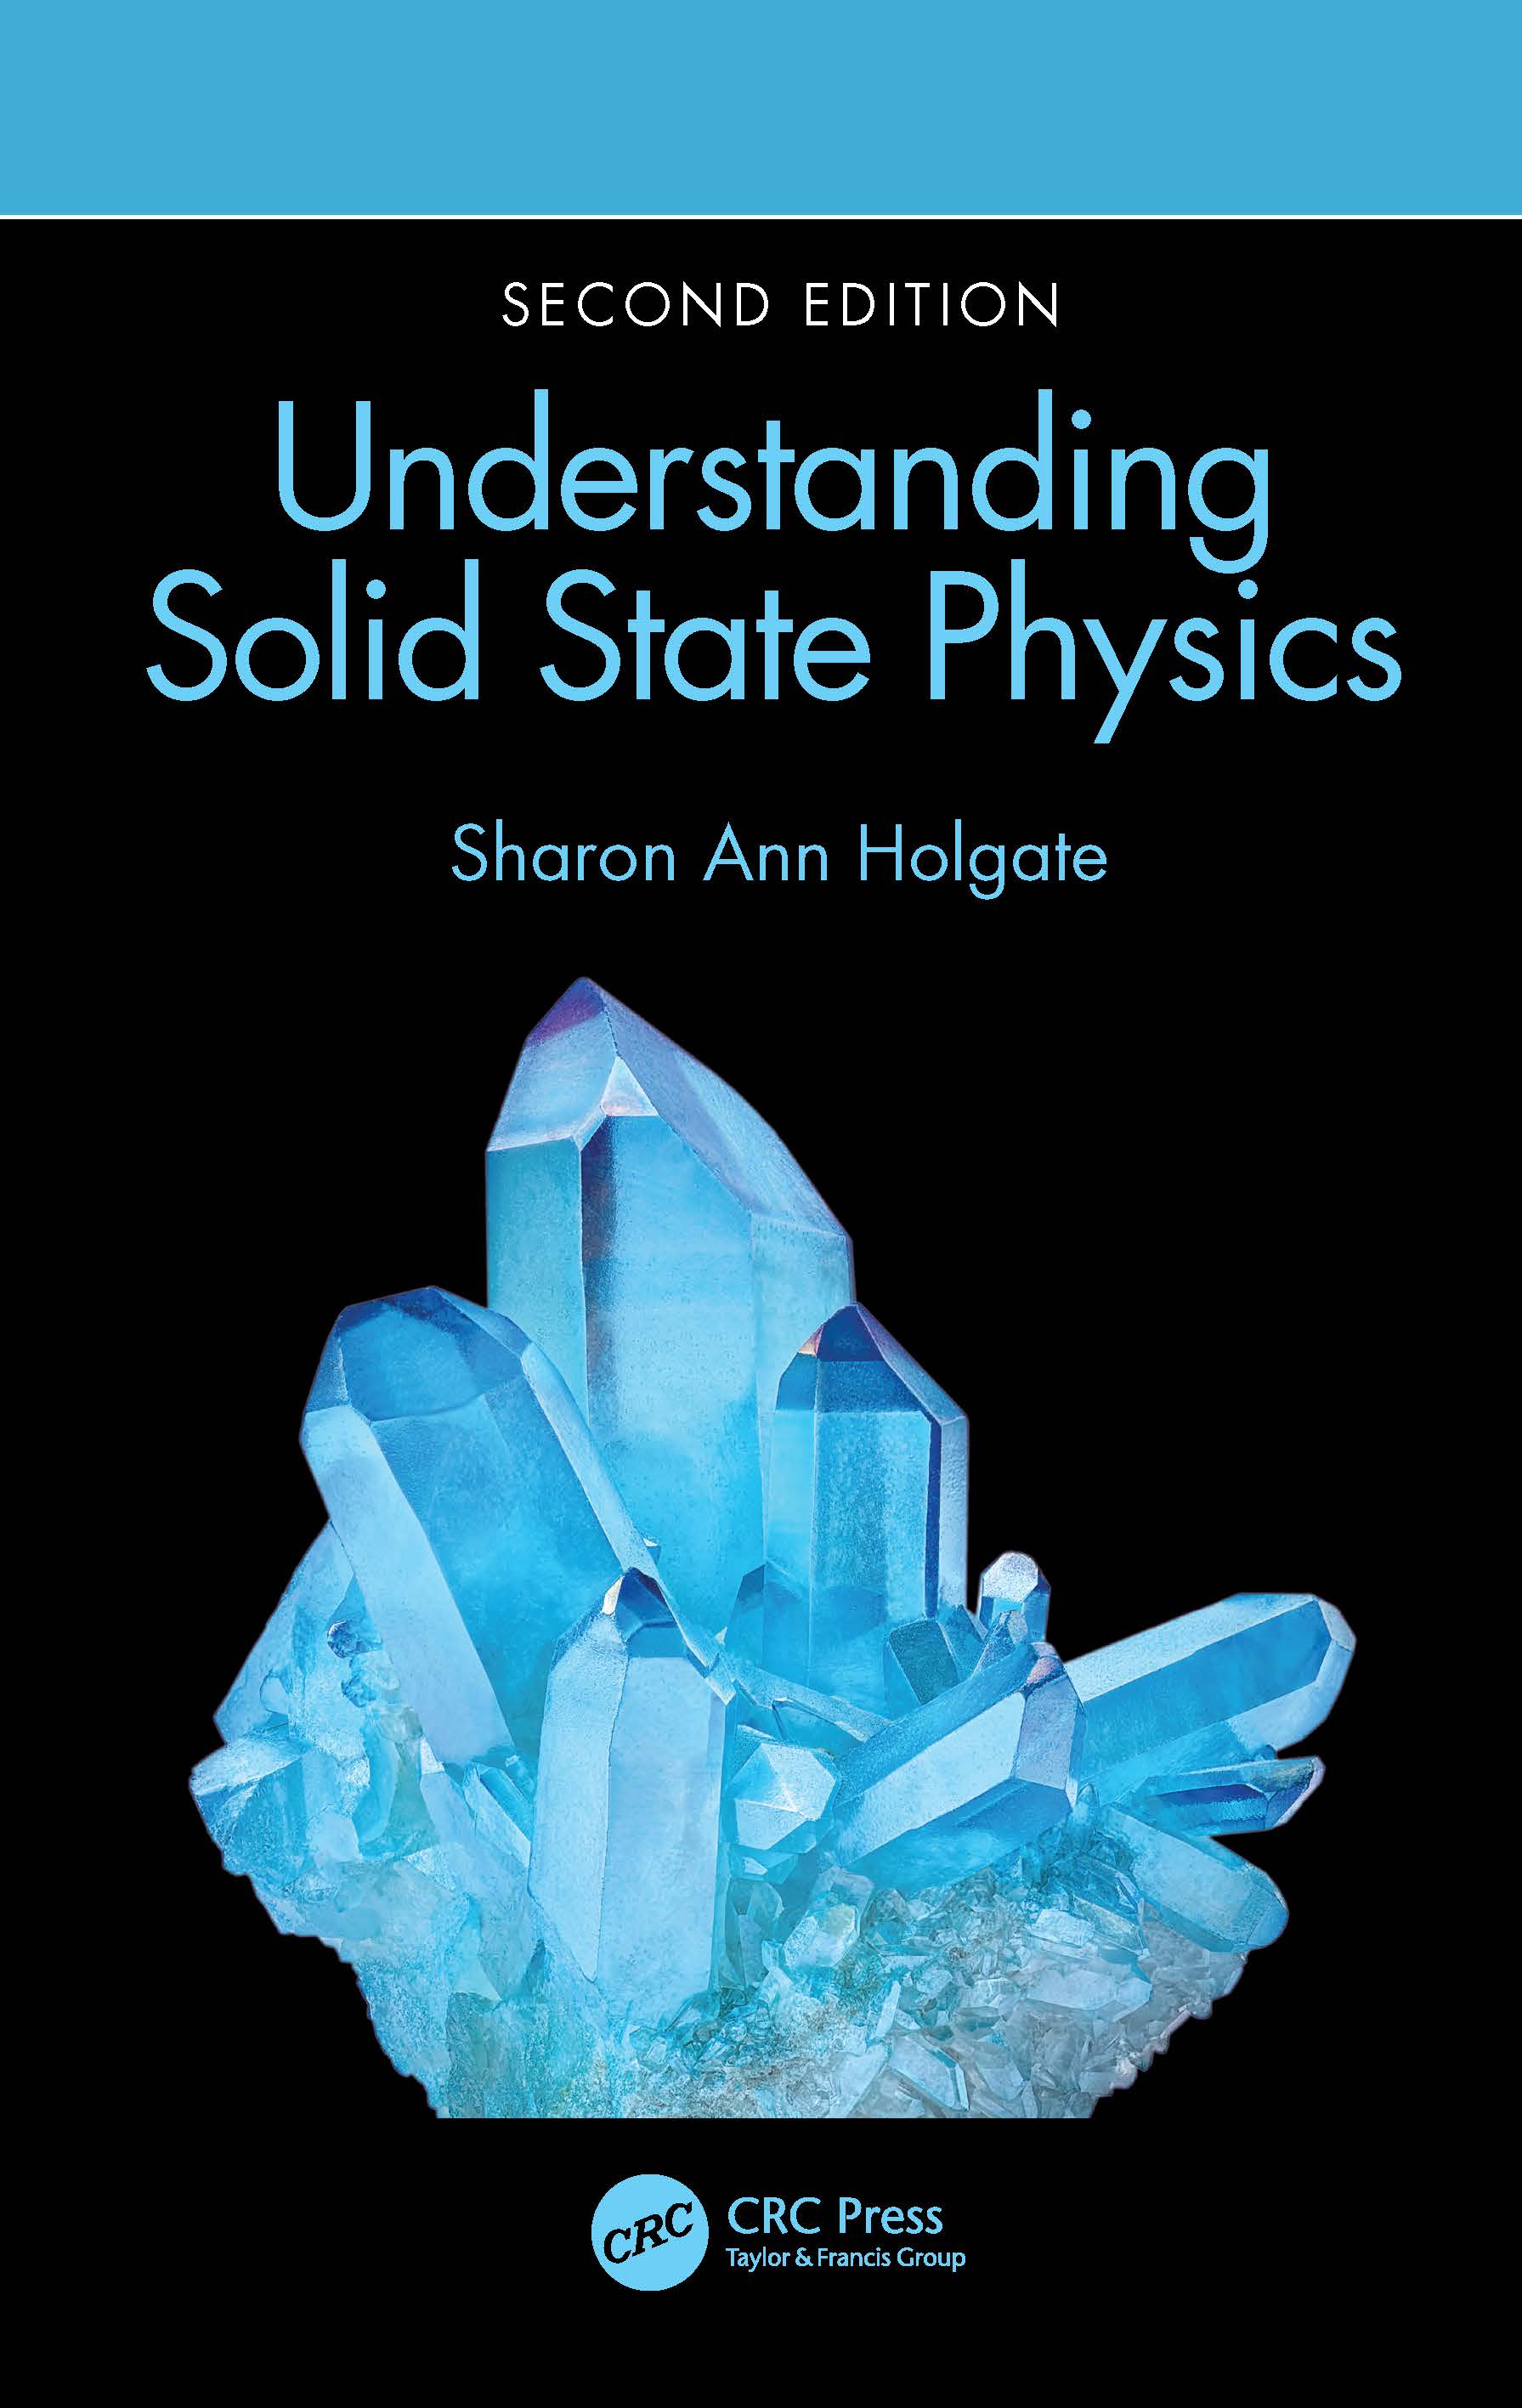 Front cover of Understanding Solid State Physics 2nd edition featuring a blue coloured crystal